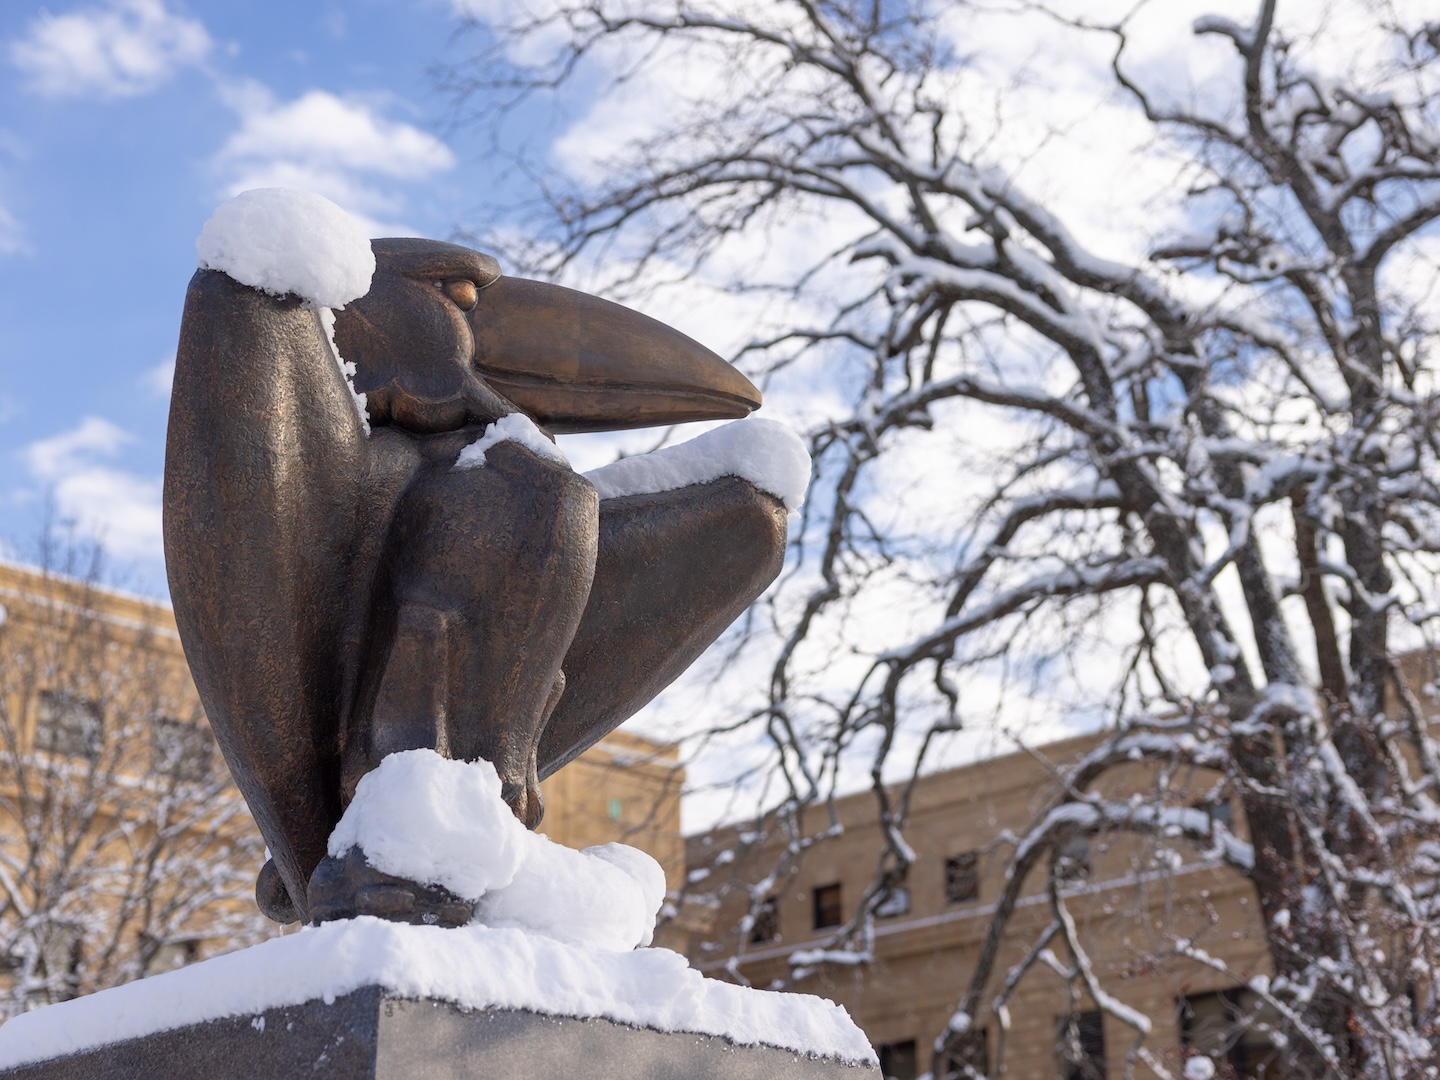 Jayhawk sculpture dusted with snow